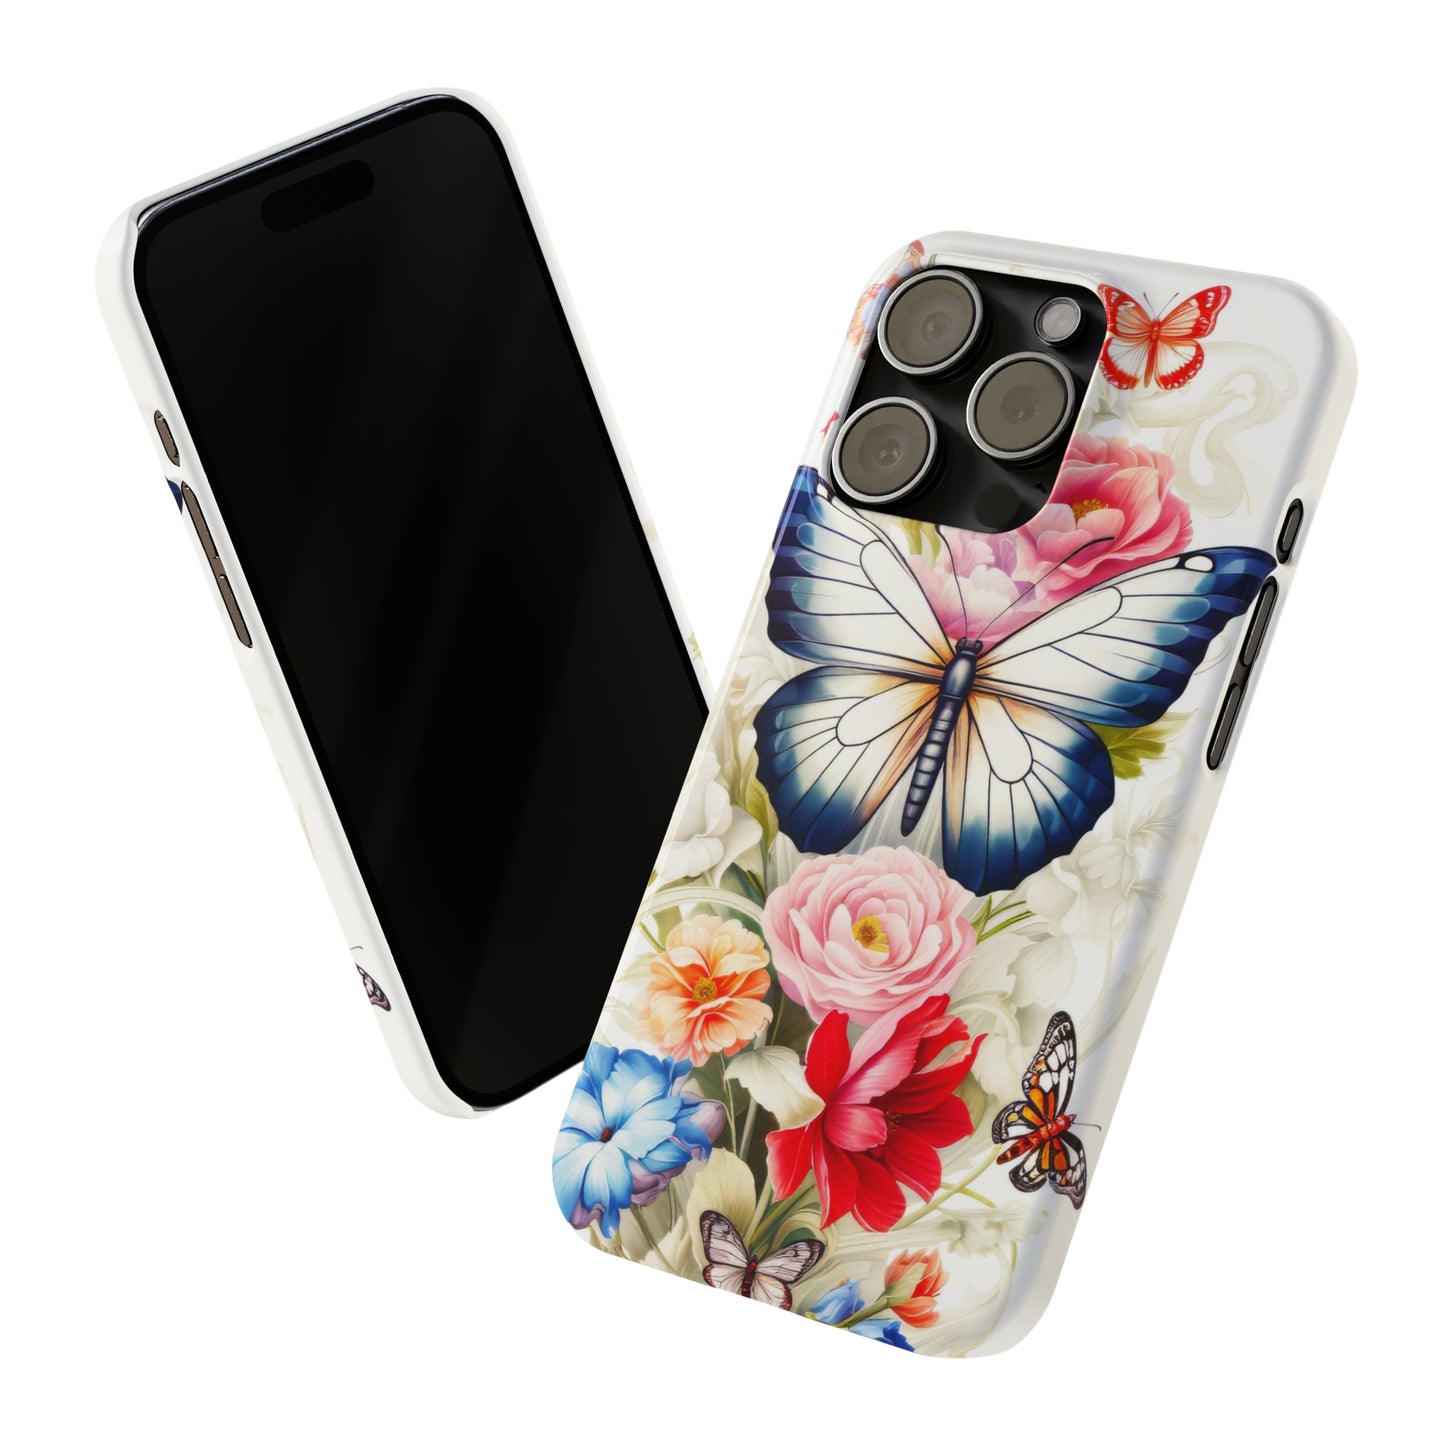 Butterfly Floral iPhone Case